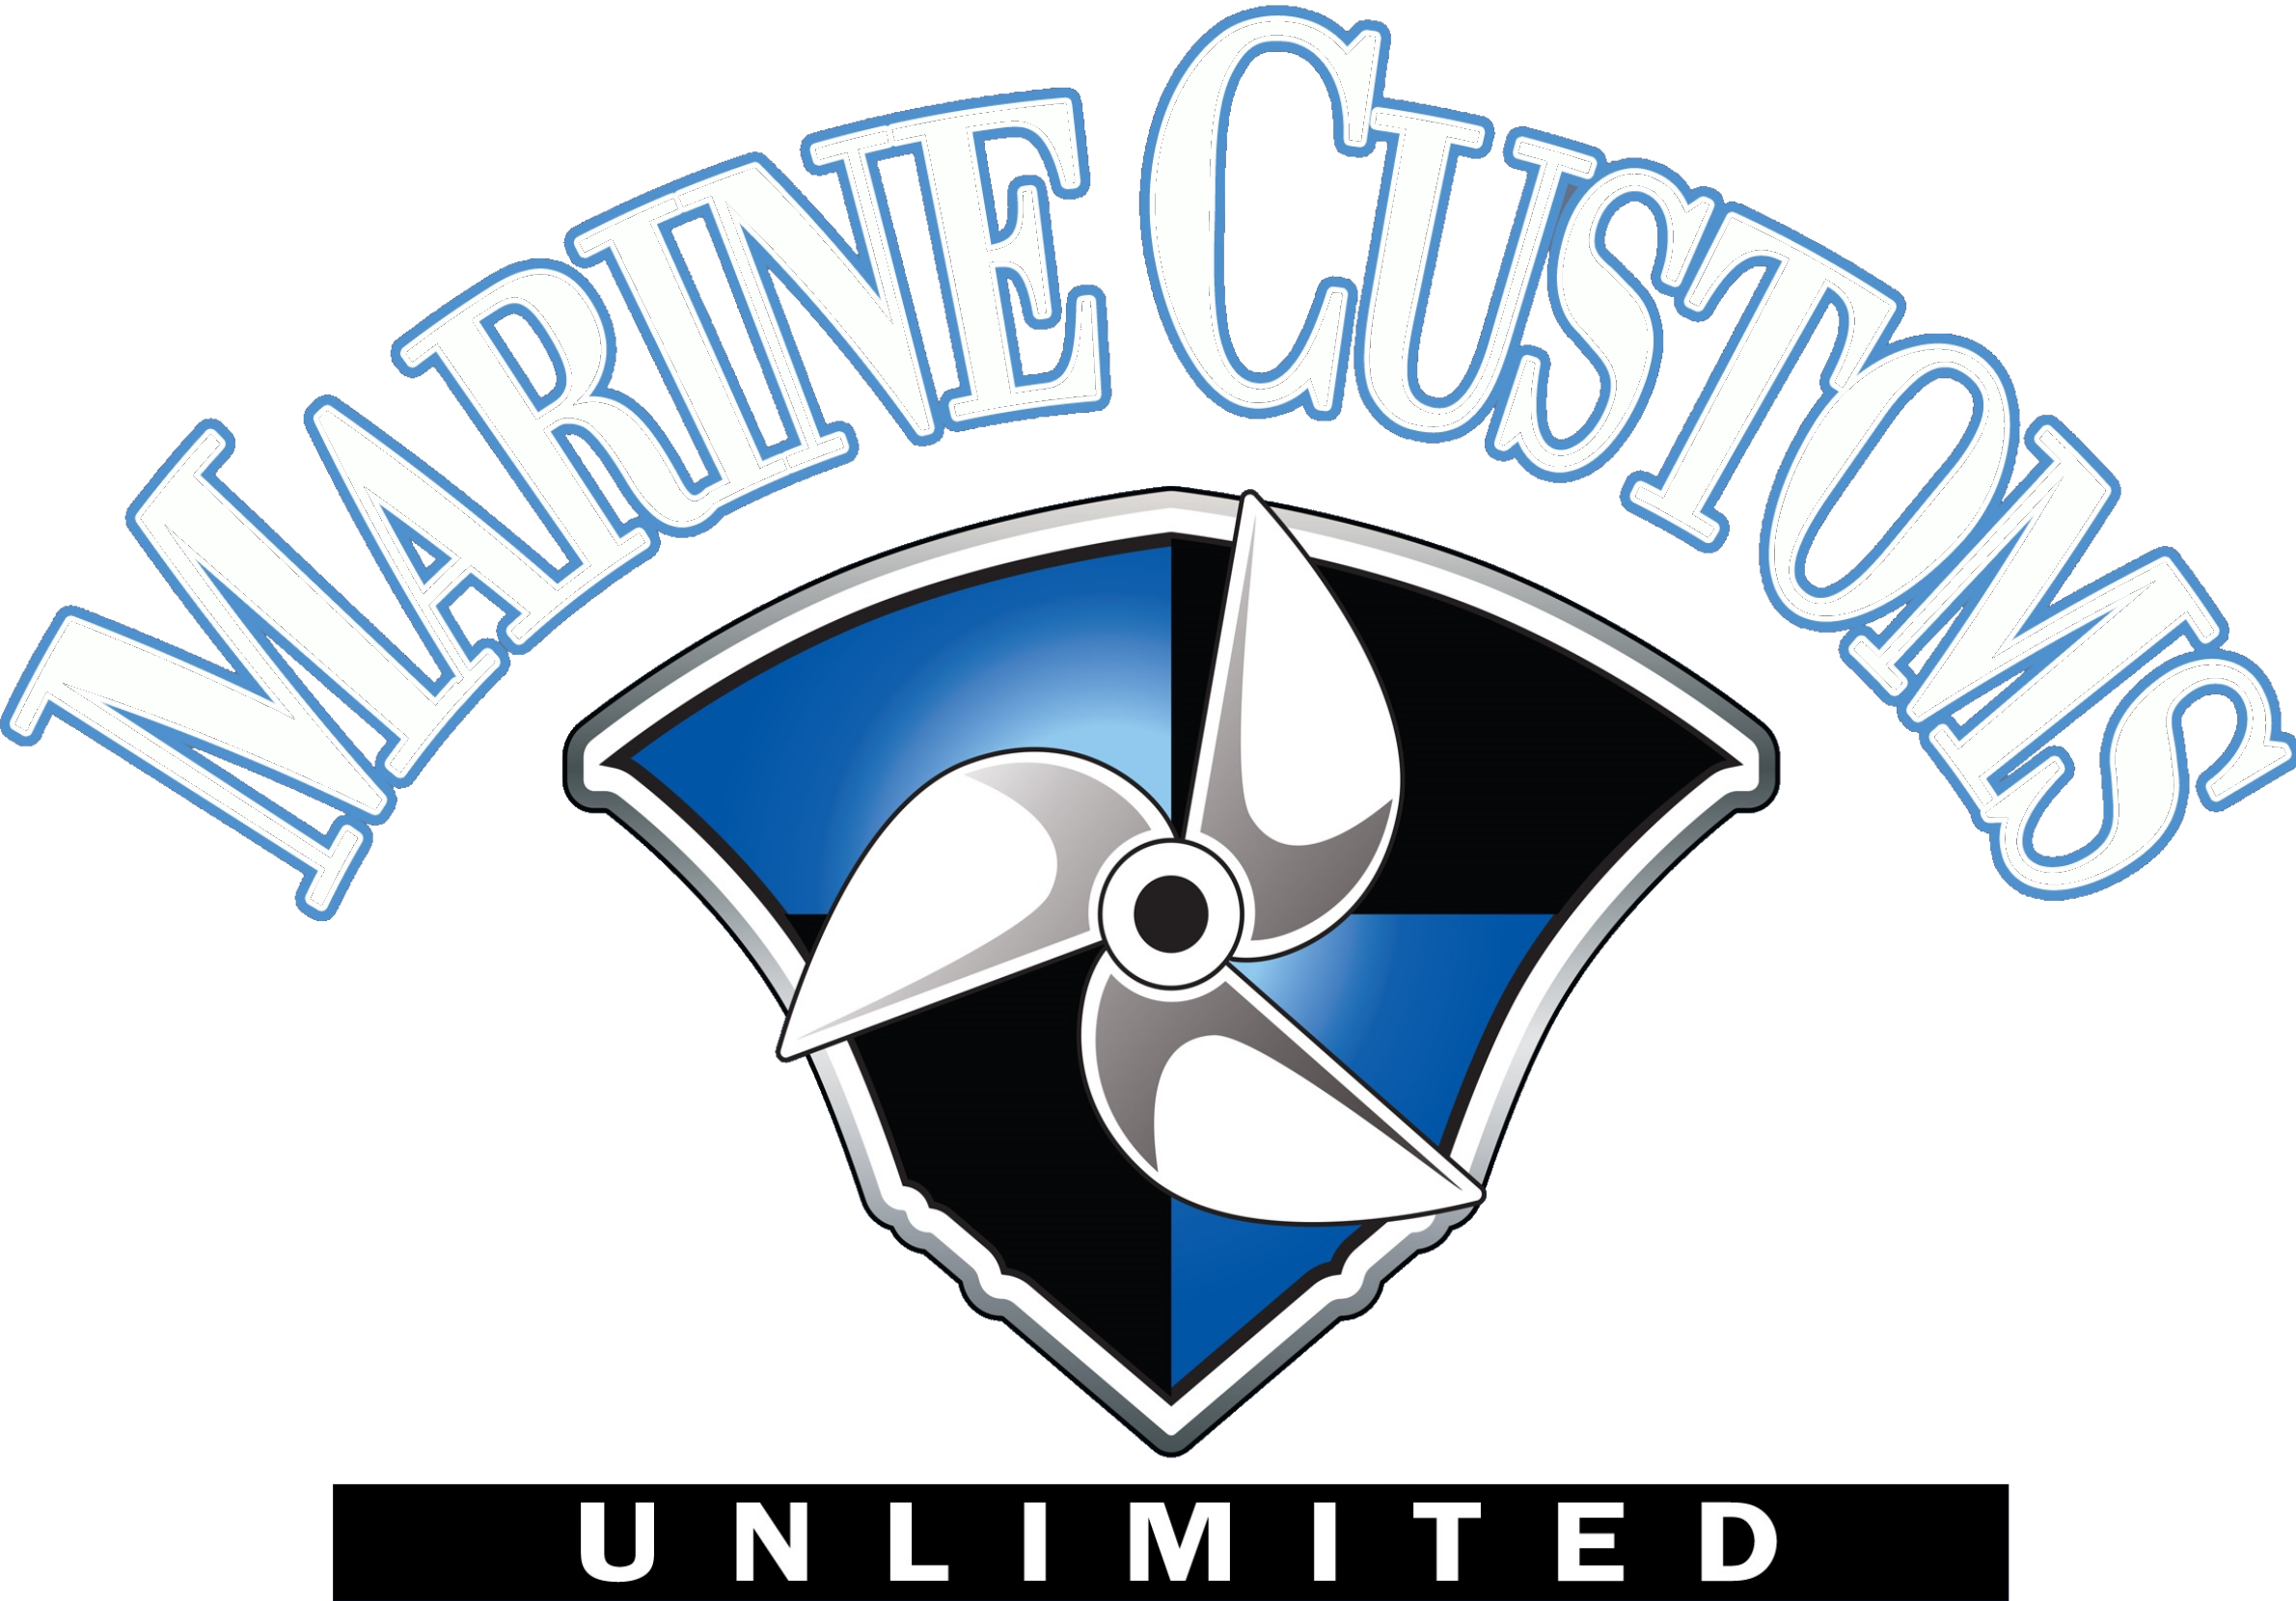 Welding clipart fabrication. And marine customs unlimited